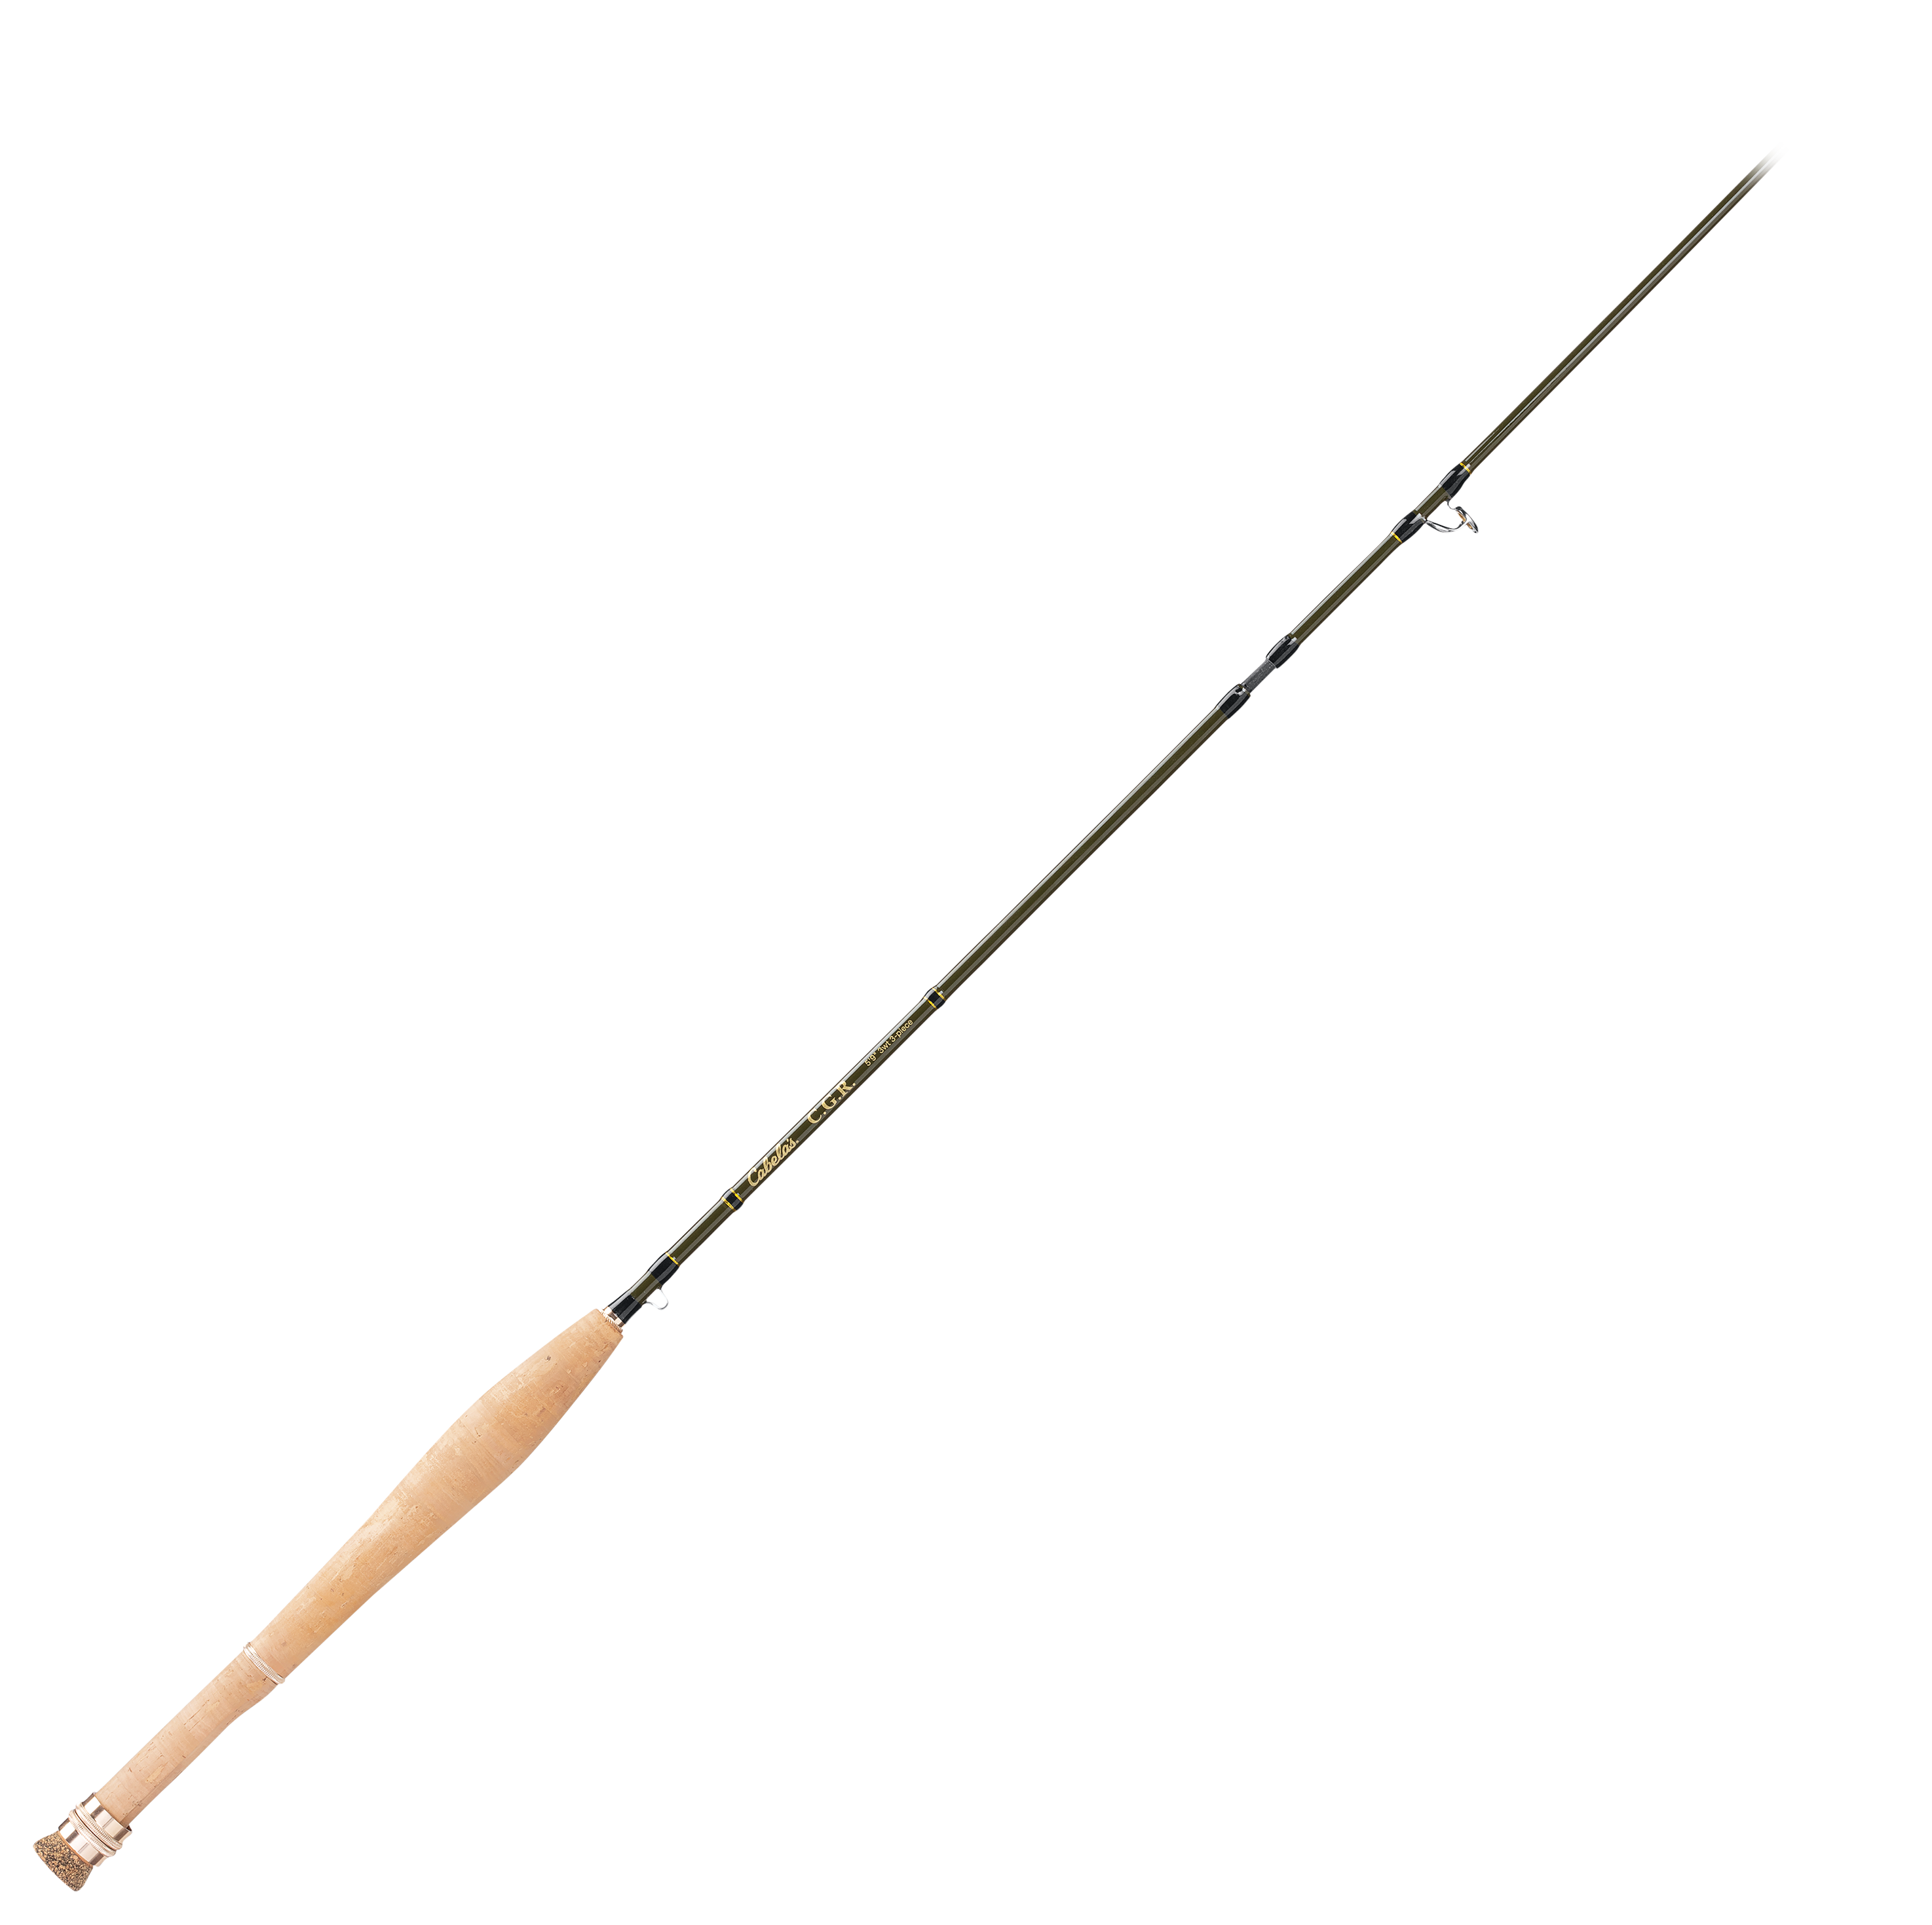 Sold at Auction: CORTLAND, CABELAS FLY FISHING RODS